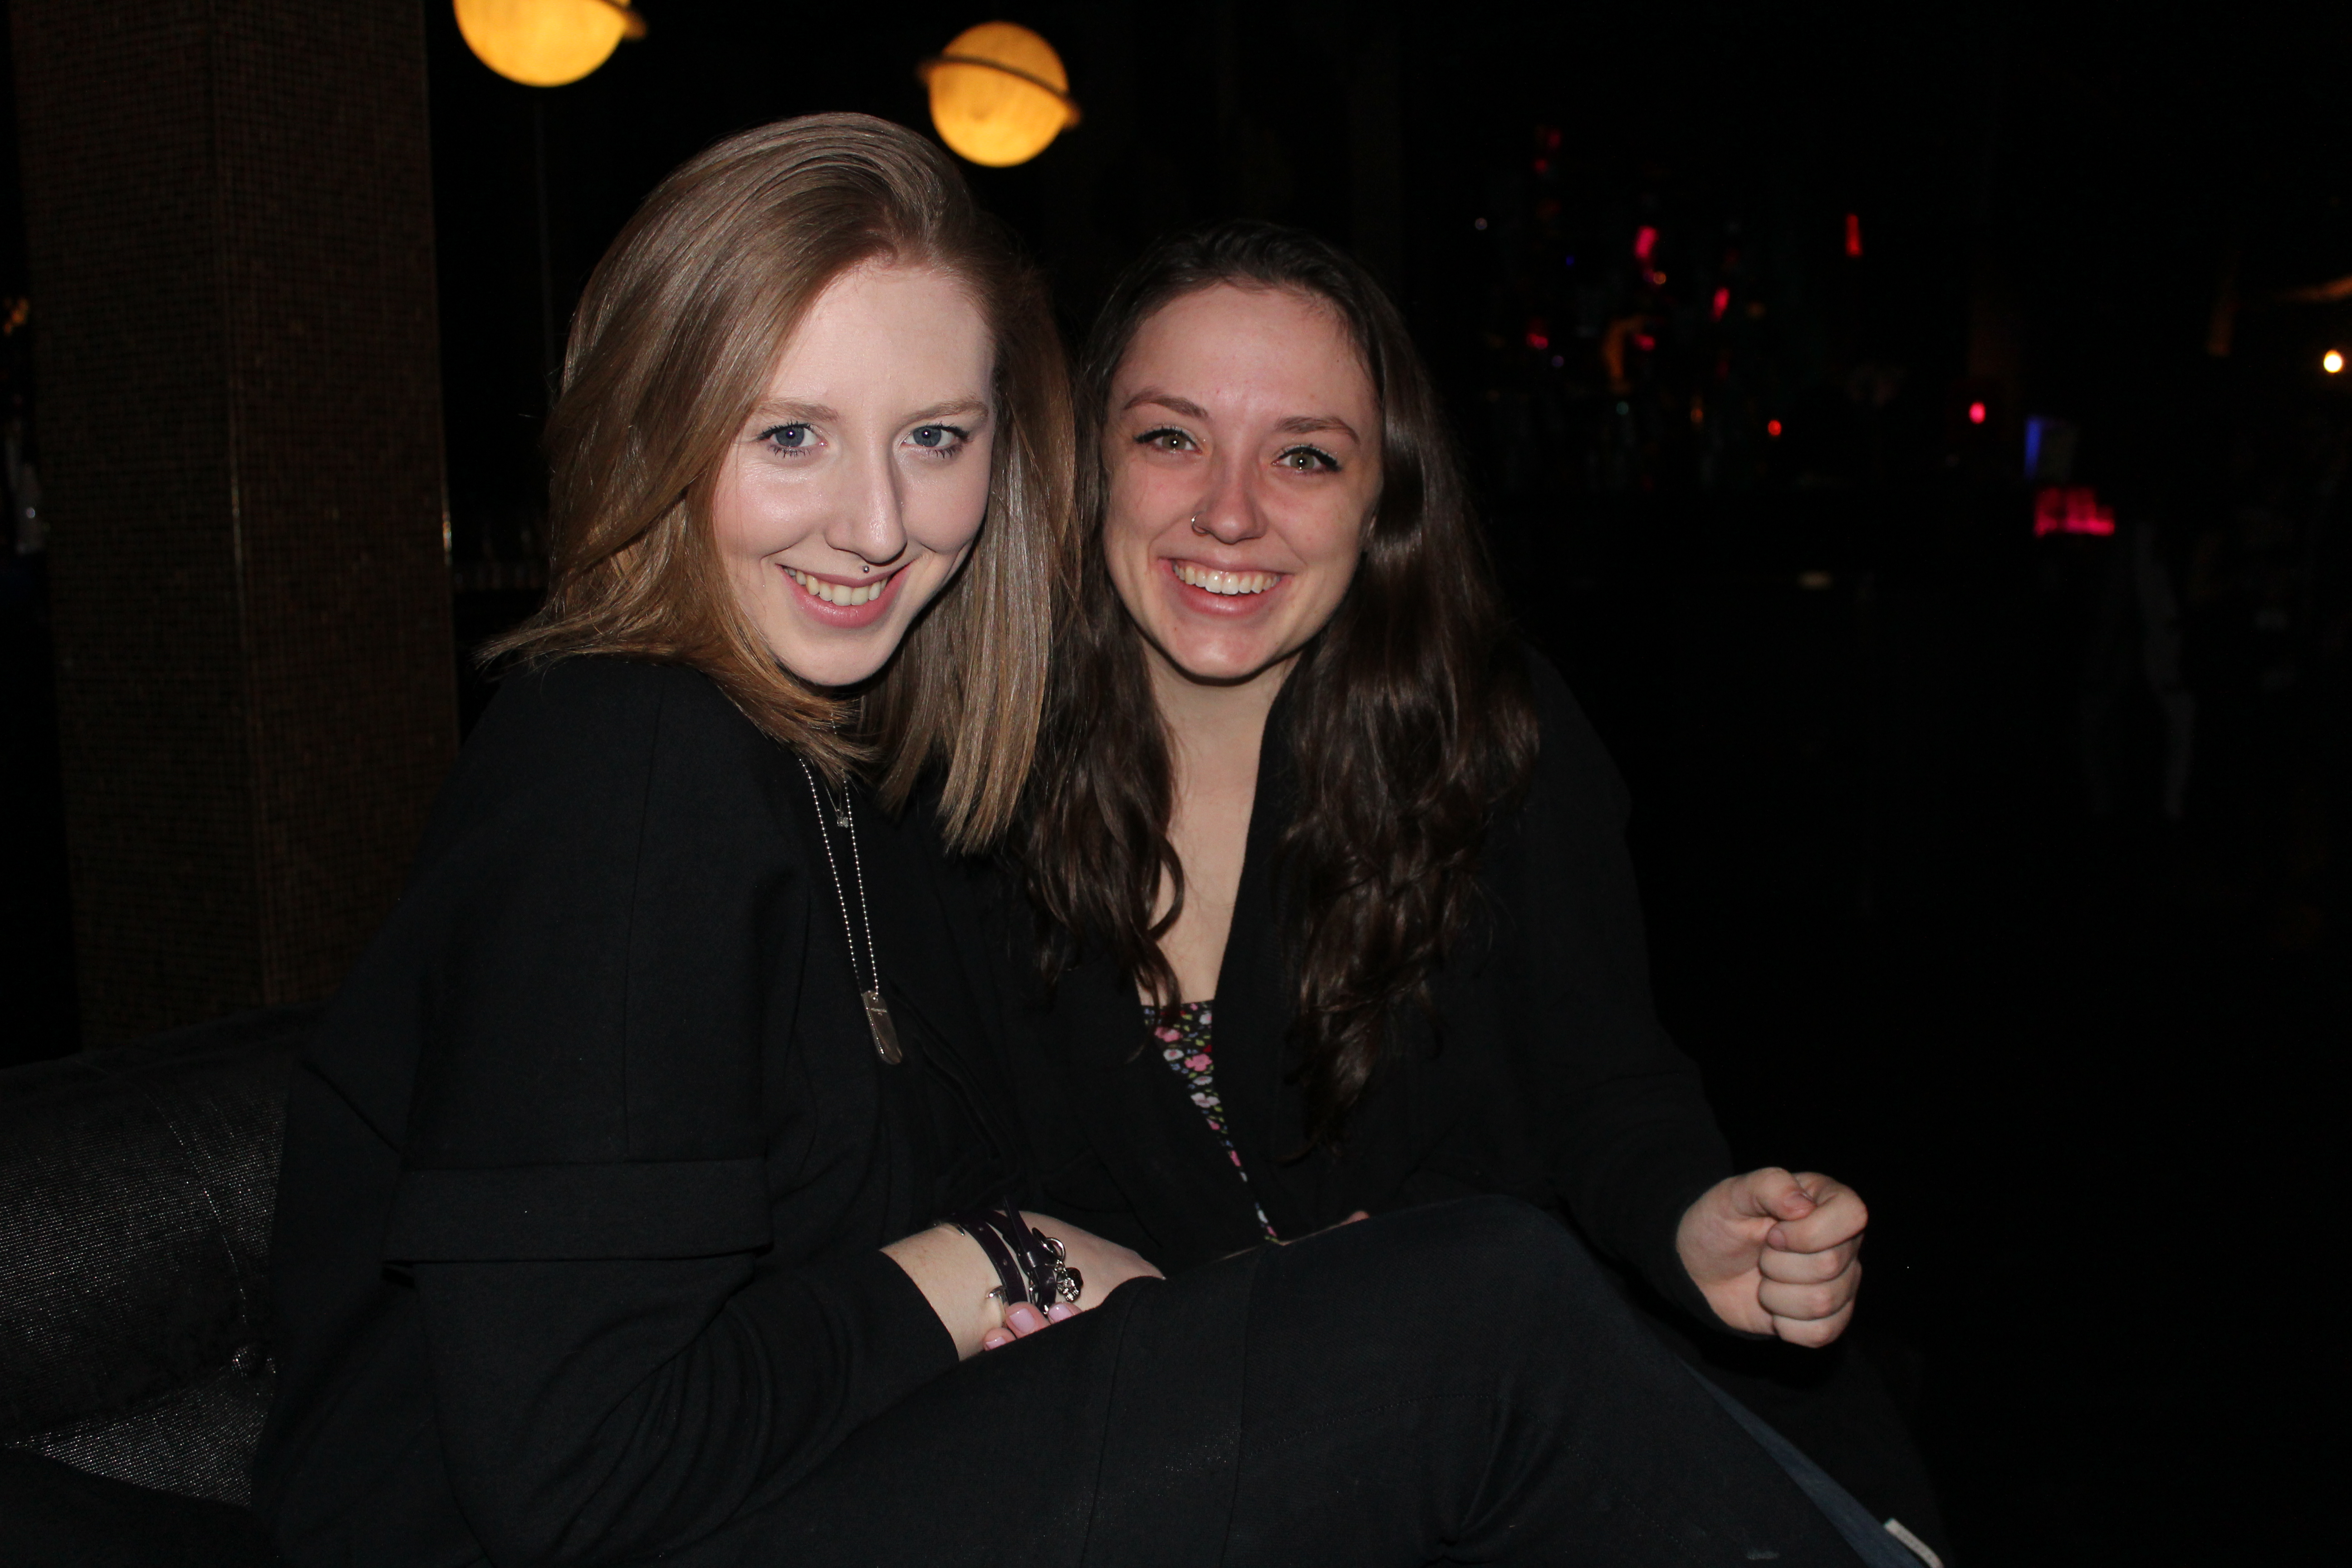 two university aged girls sitting on a large leather couch in a club-like setting